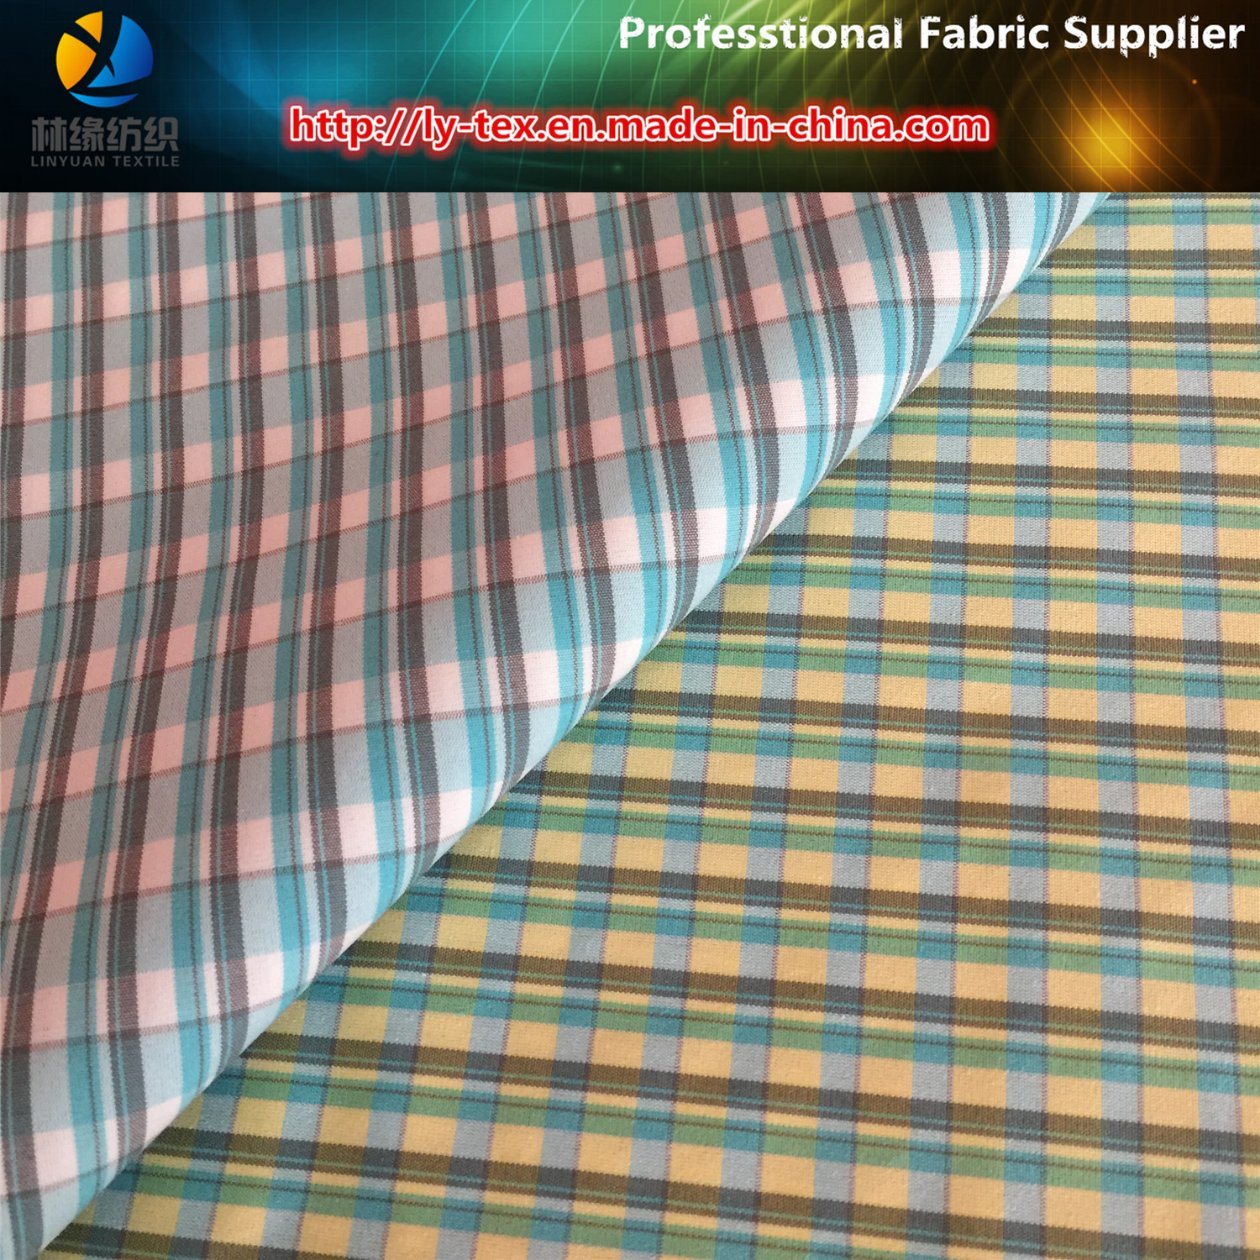 Coolmax Fabric, Coolpass Yarn Dyed Shirting Fabric, Polyester Fabric (YD1111)